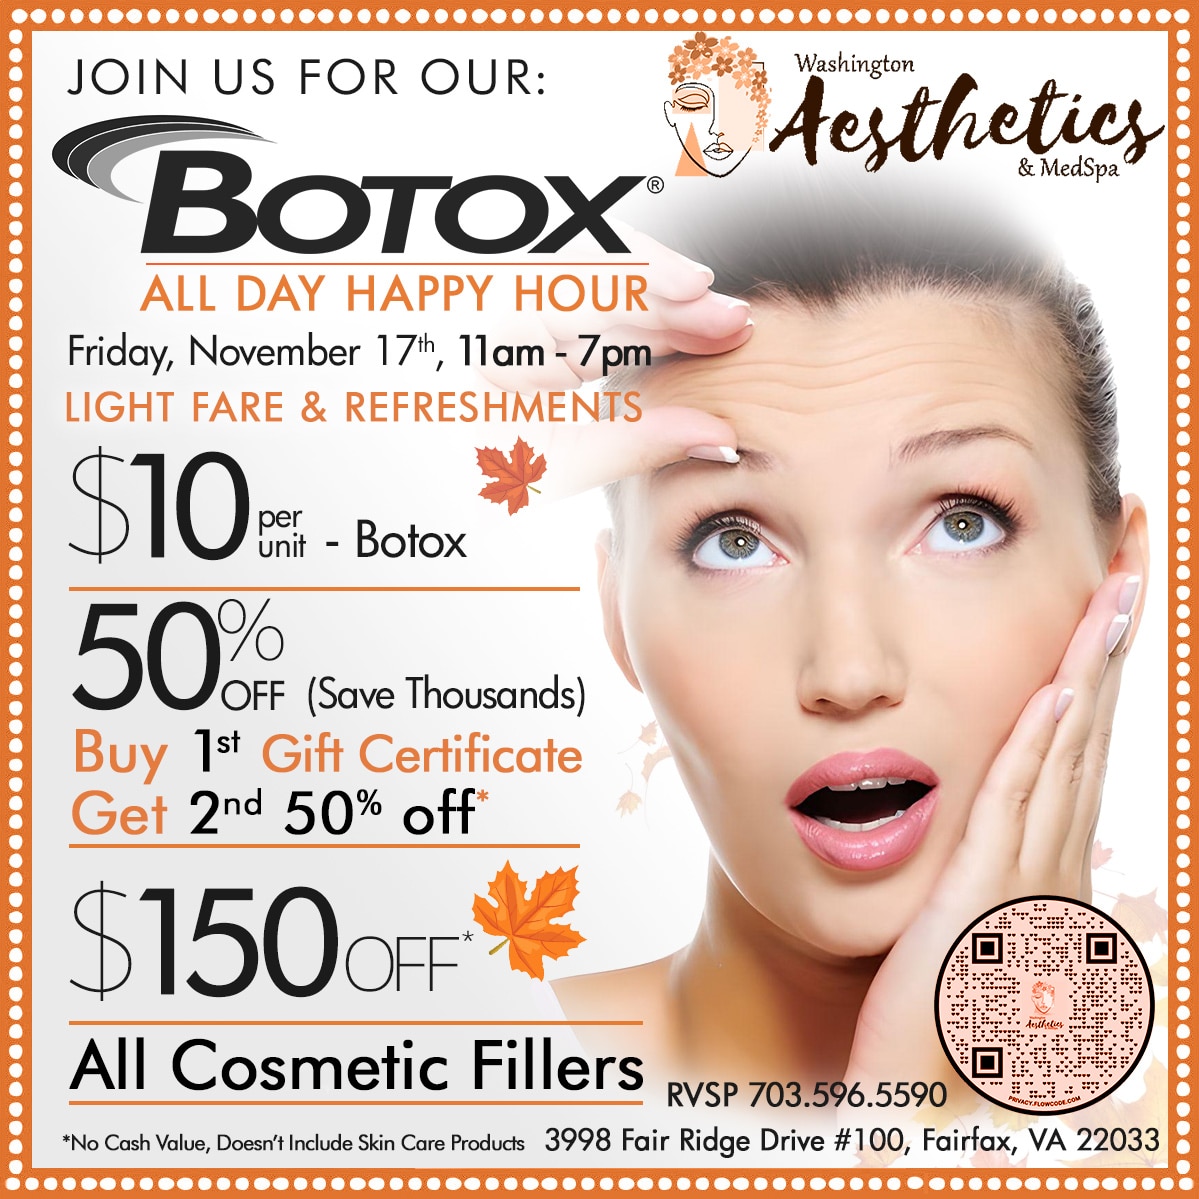 BOTOX $10 per unit ALL DAY Fairfax VA , Join Our Botox Happy Hour